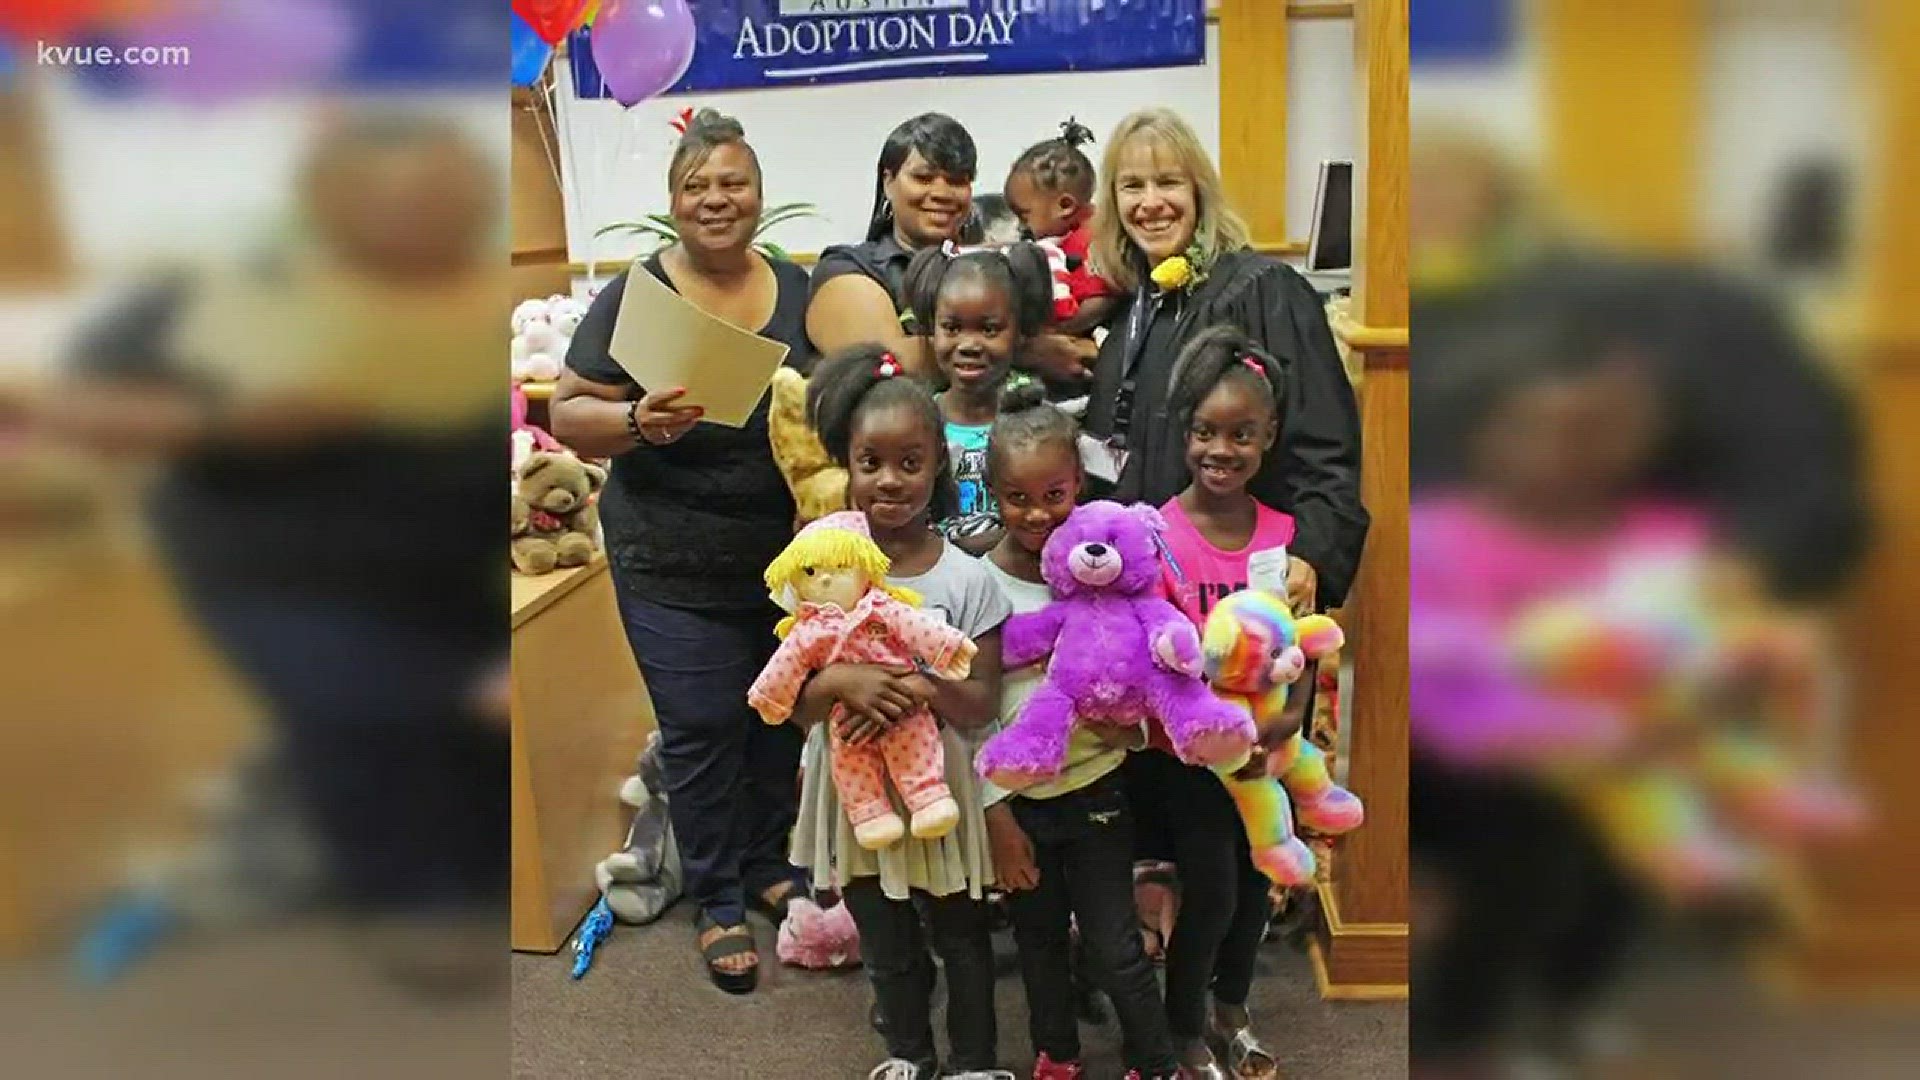 Denise Hyde with the Adoption Day Committee discusses how November is National Adoption month, the nationwide effort to celebrate families that are welcoming new members from foster care and to draw attention to the continuing need for foster and adoptive